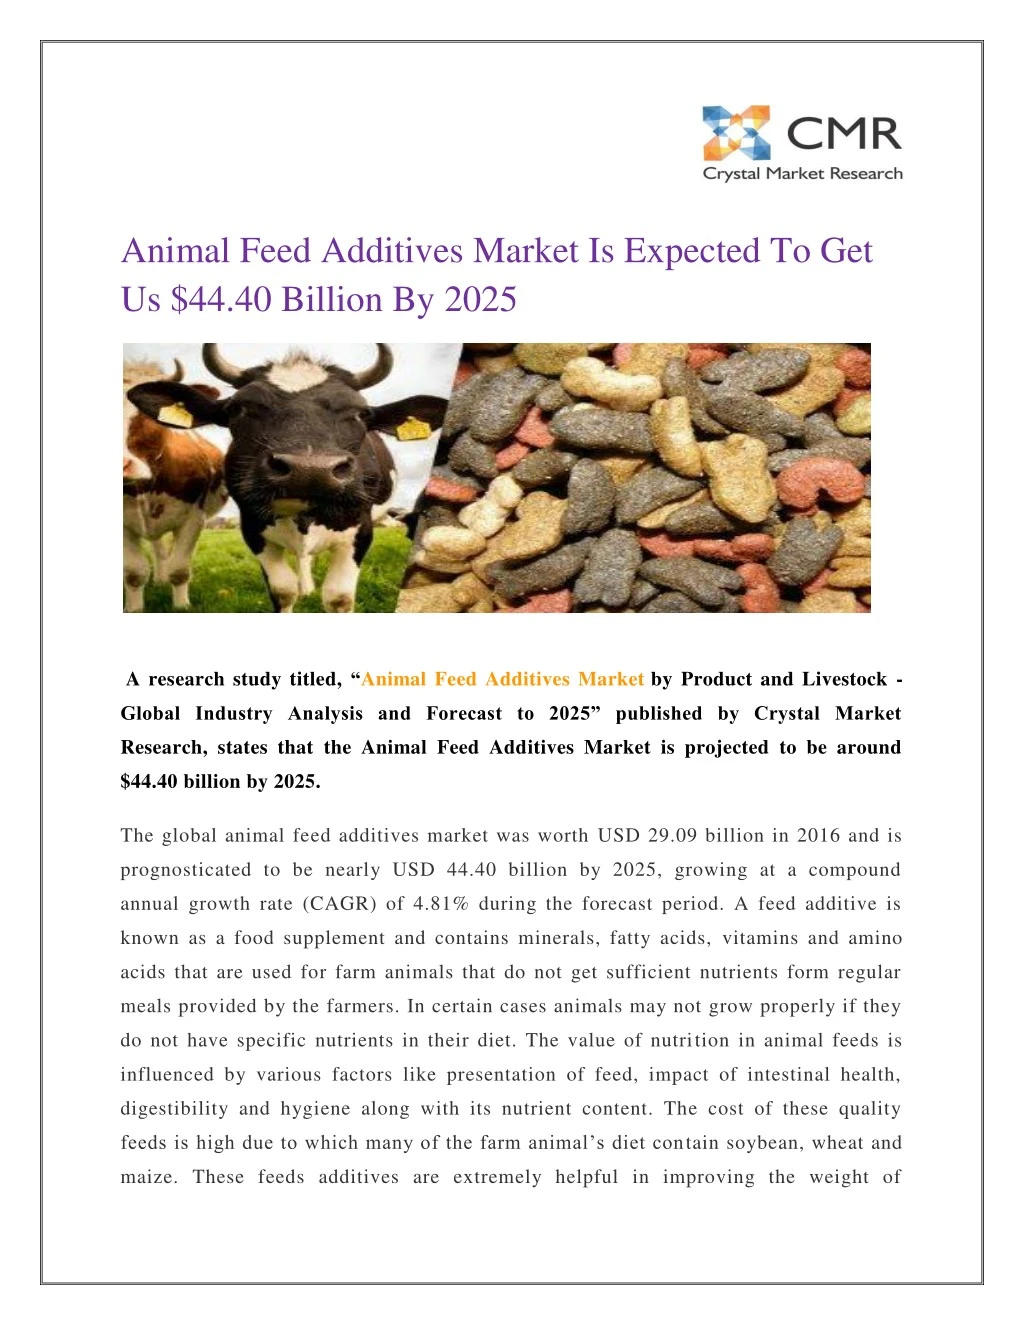 animal feed additives market is expected